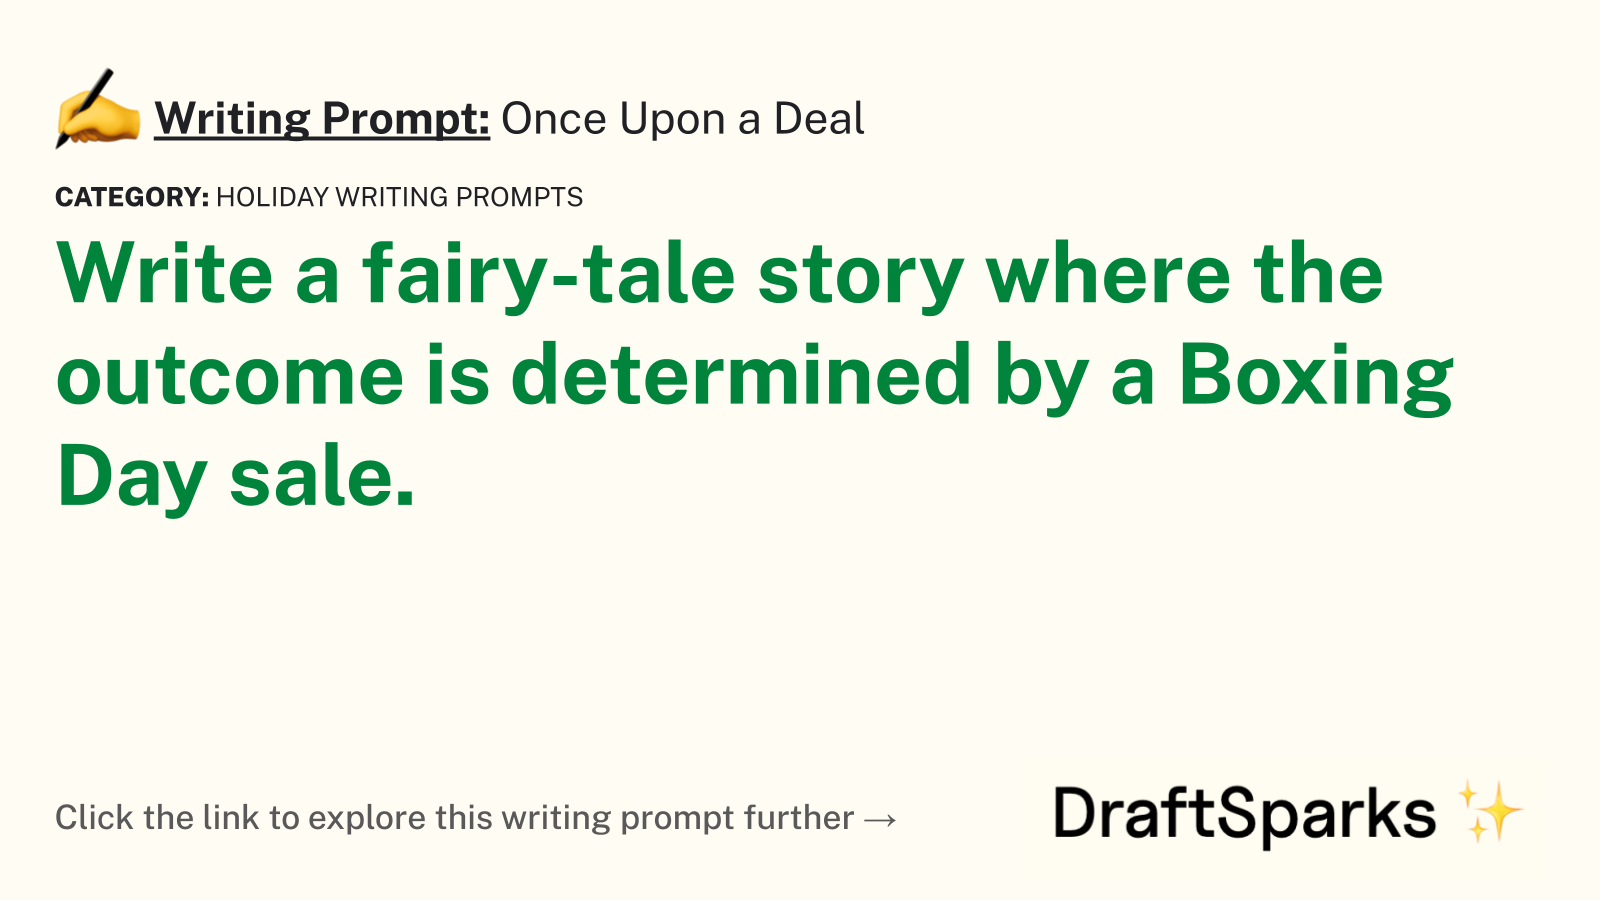 Once Upon a Deal